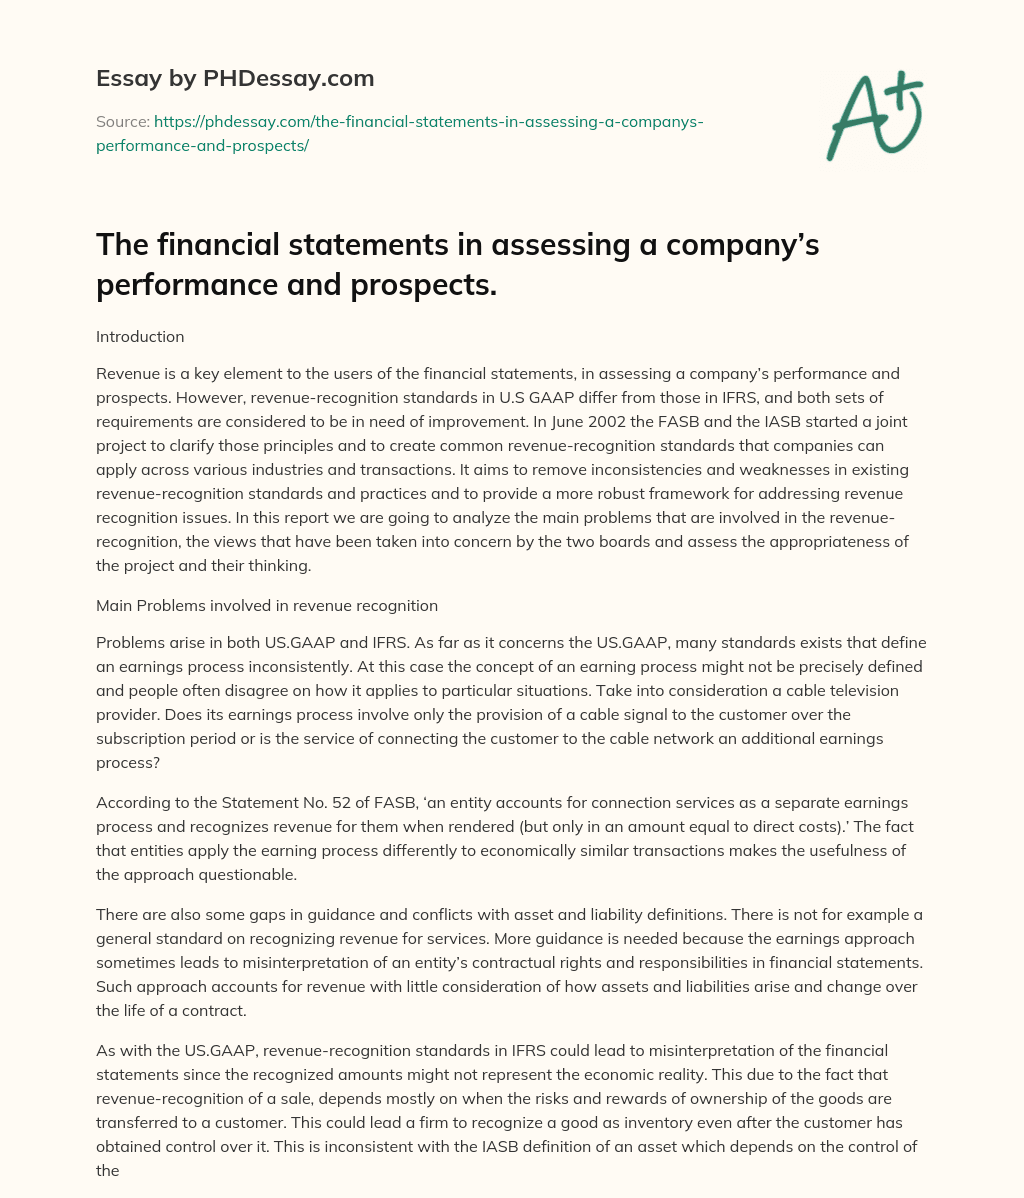 The financial statements in assessing a company’s performance and prospects. essay